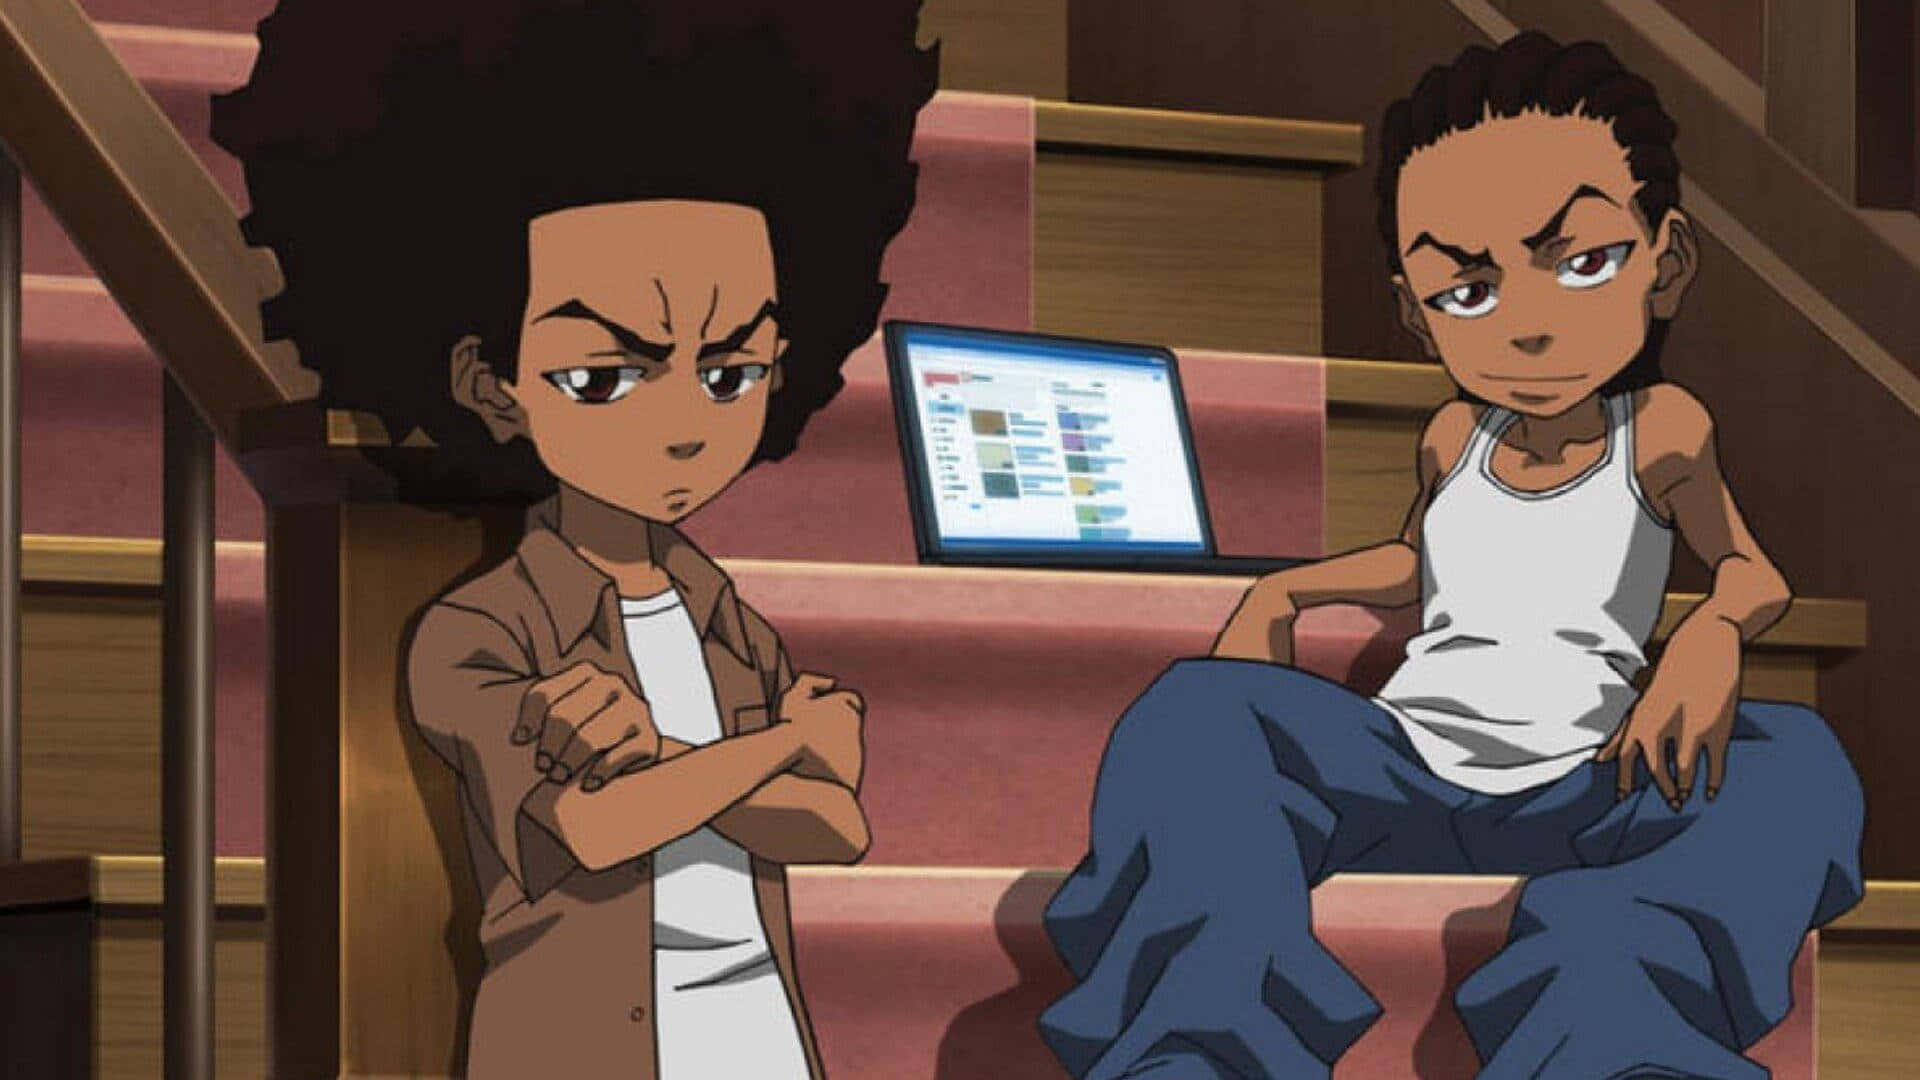 "Life doesn't always give us lemons, but Huey Freeman refuses to back down in the face of any challenge."